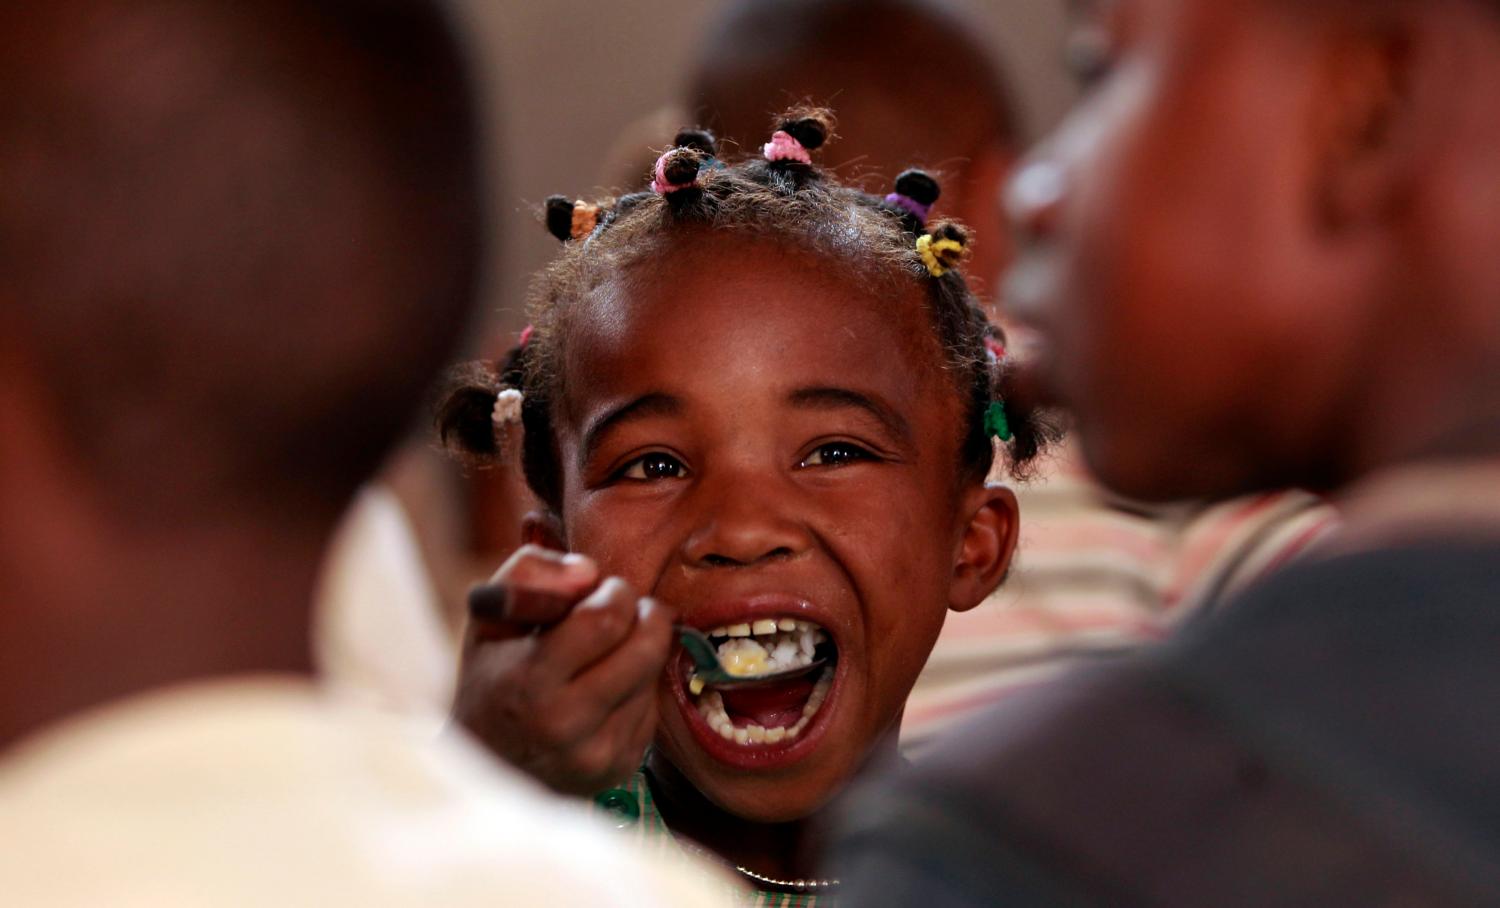 A Malagasy child eats at the United Nations World Food Program (WFP) school feeding initiative at the Saint de Paul community centre in Tanjombato, a southern suburb of the capital Antananarivo, October 28, 2013. The WFP, in collaboration with partners, provide food assistance to poor children to support their access to education. The centre receives about 927 children aged between 5 to 18 years old, whose parents earn around 2000 Madagascan Ariary ($1) a day. They also receive primary education, literacy tuition, scholastic adjustment, professional training and learn new crafts. REUTERS/Thomas Mukoya (MADAGASCAR - Tags: EDUCATION FOOD HEALTH SOCIETY POVERTY TPX IMAGES OF THE DAY)